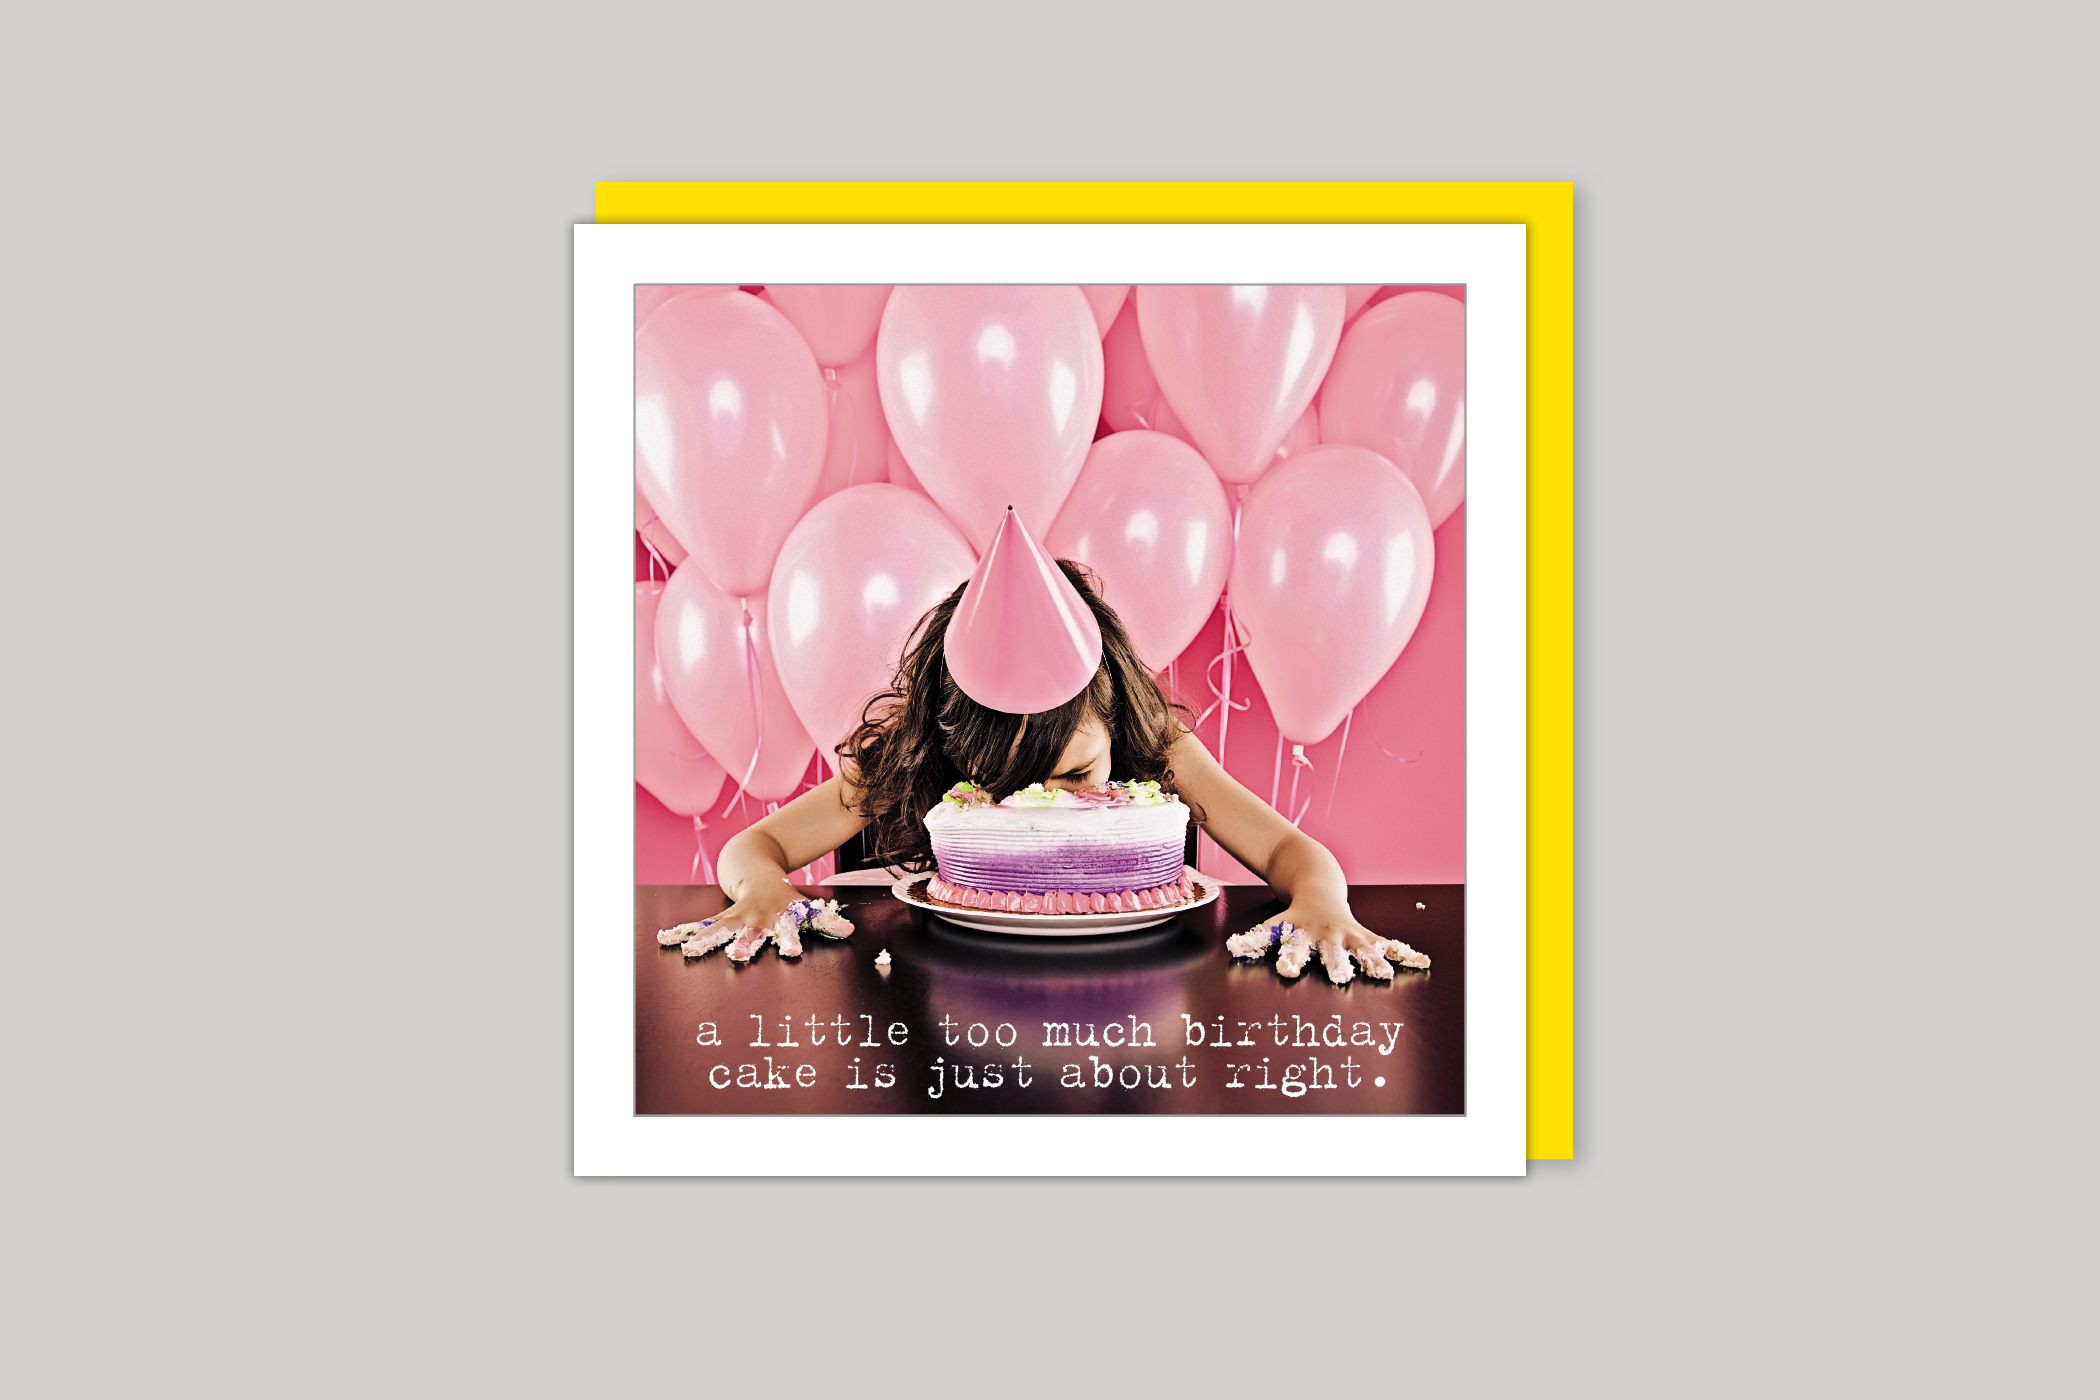 Too Much Birthday Cake from Life Is Sweet range of greeting cards by Icon, back page.